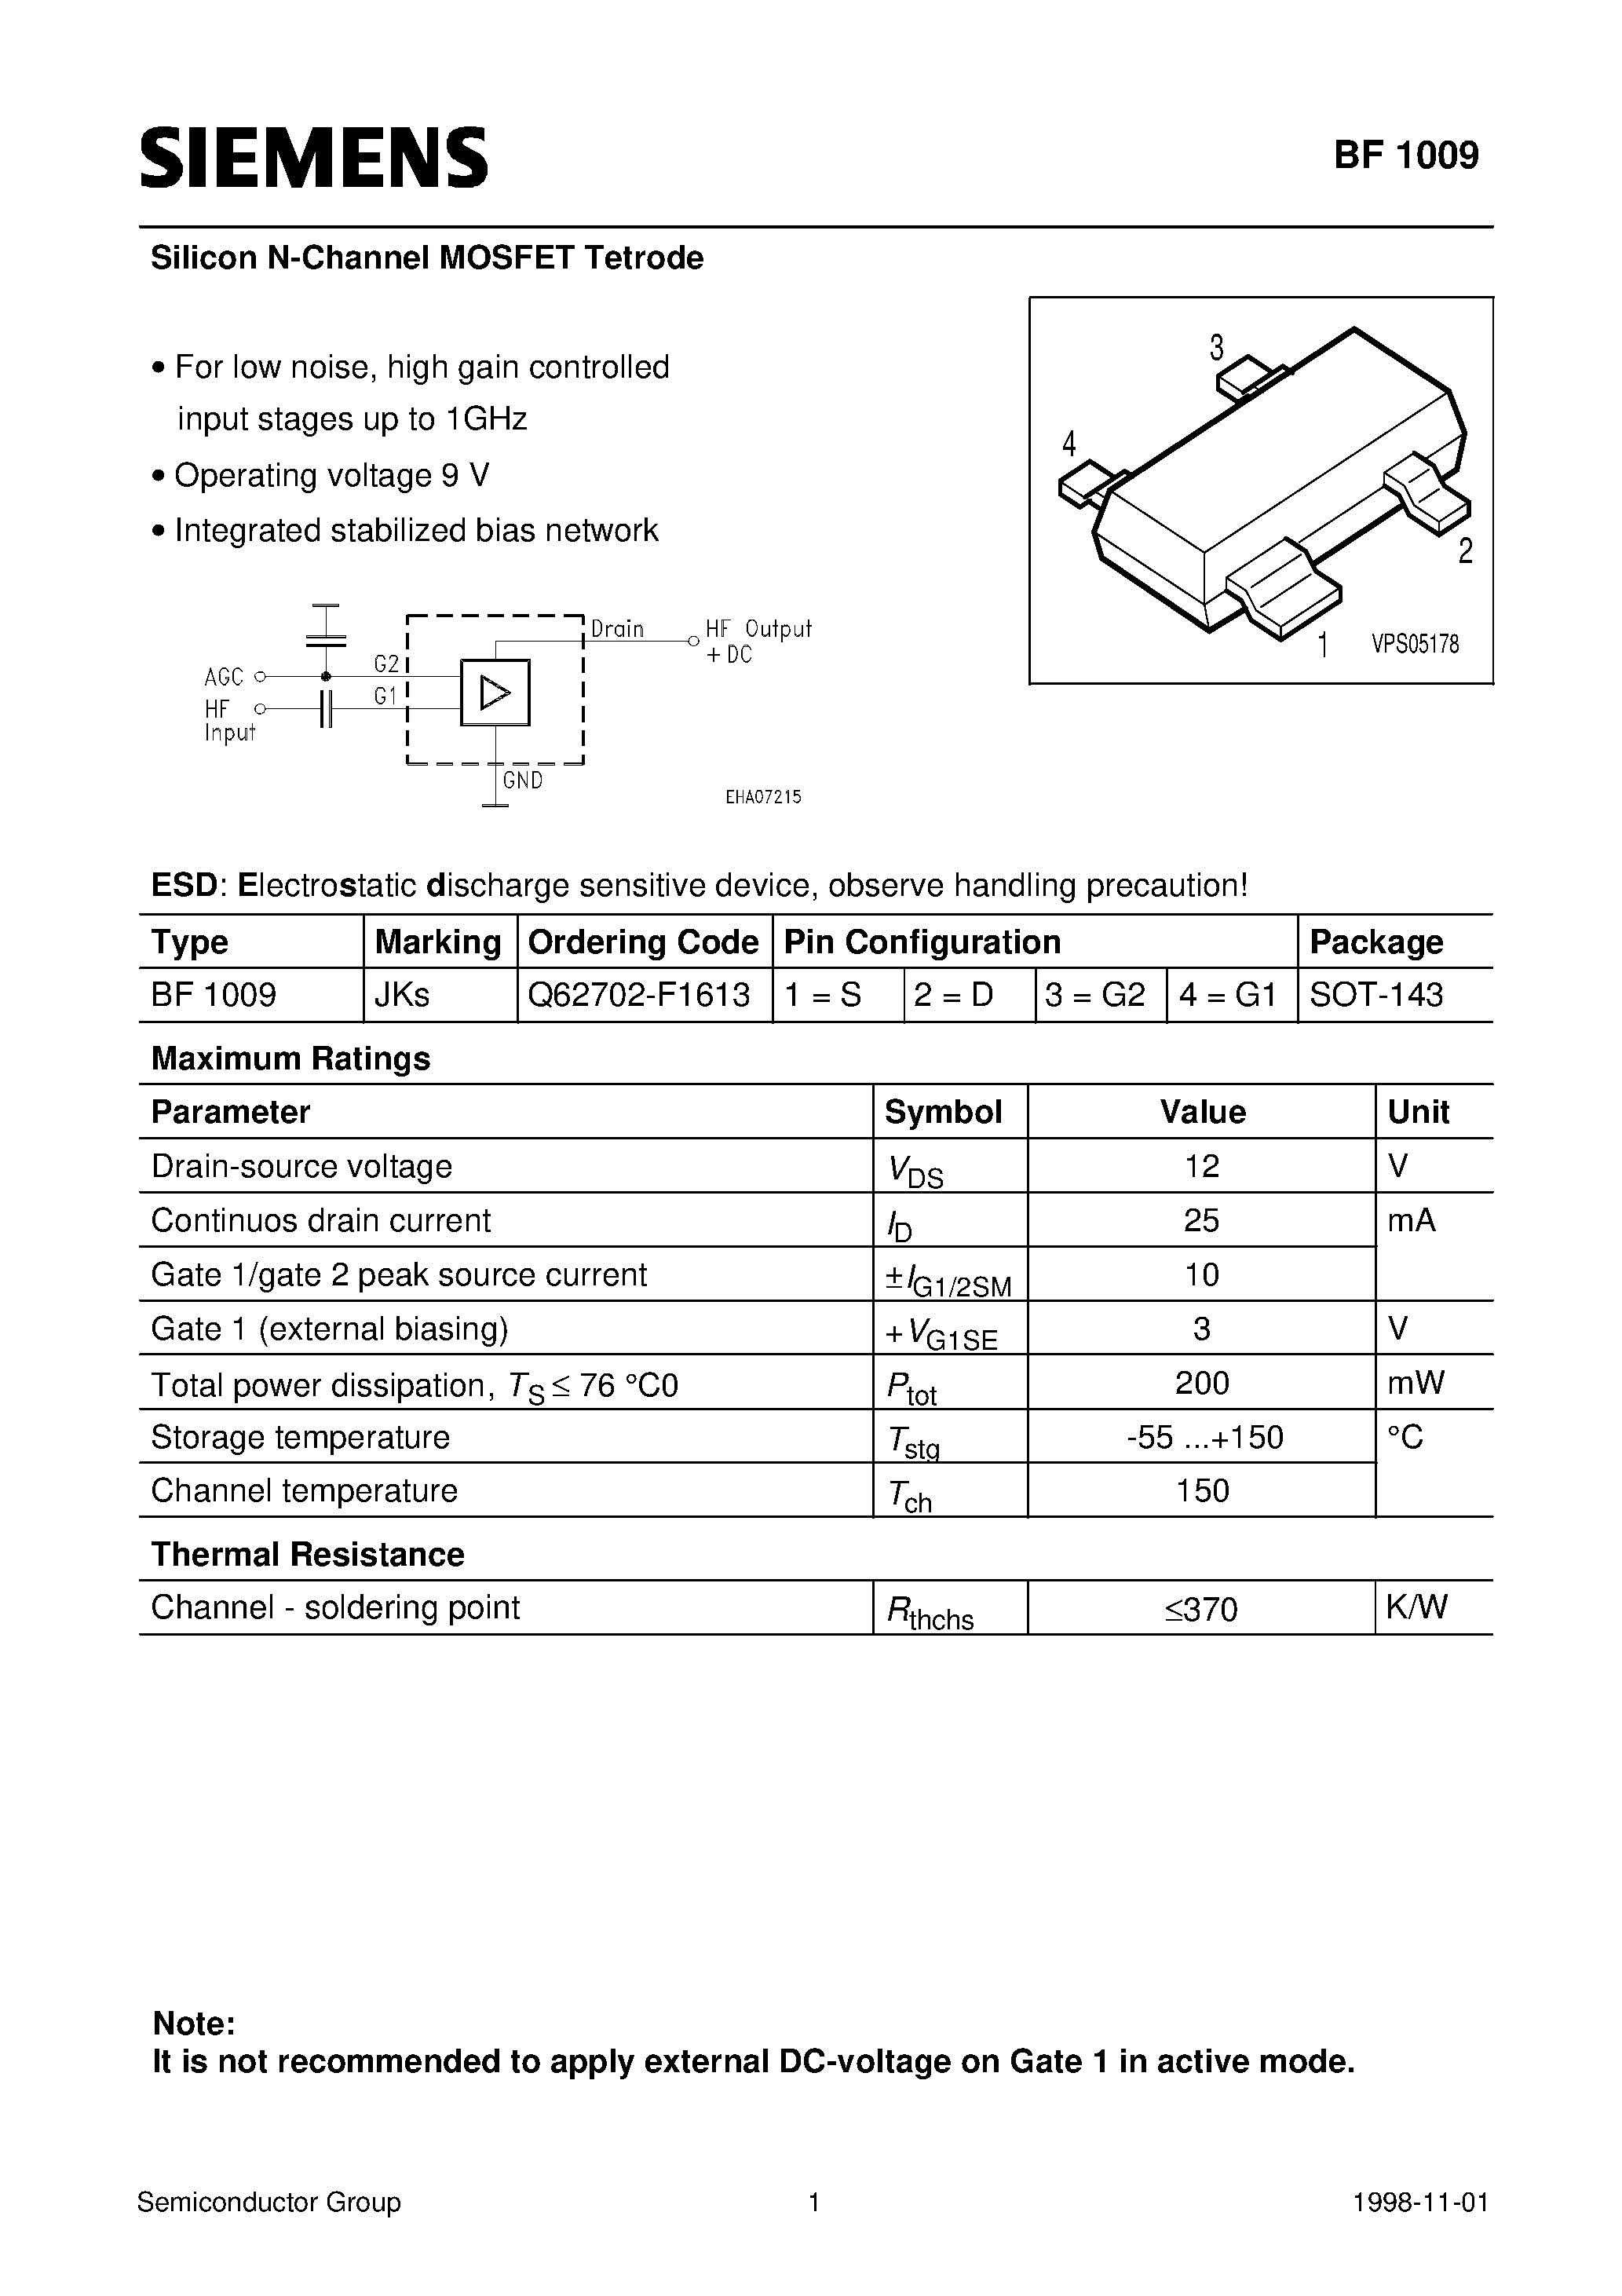 Datasheet BF1009 - Silicon N-Channel MOSFET Tetrode (For low noise/ high gain controlled input stages up to 1GHz Operating voltage 9 V Integrated stabilized bias network page 1